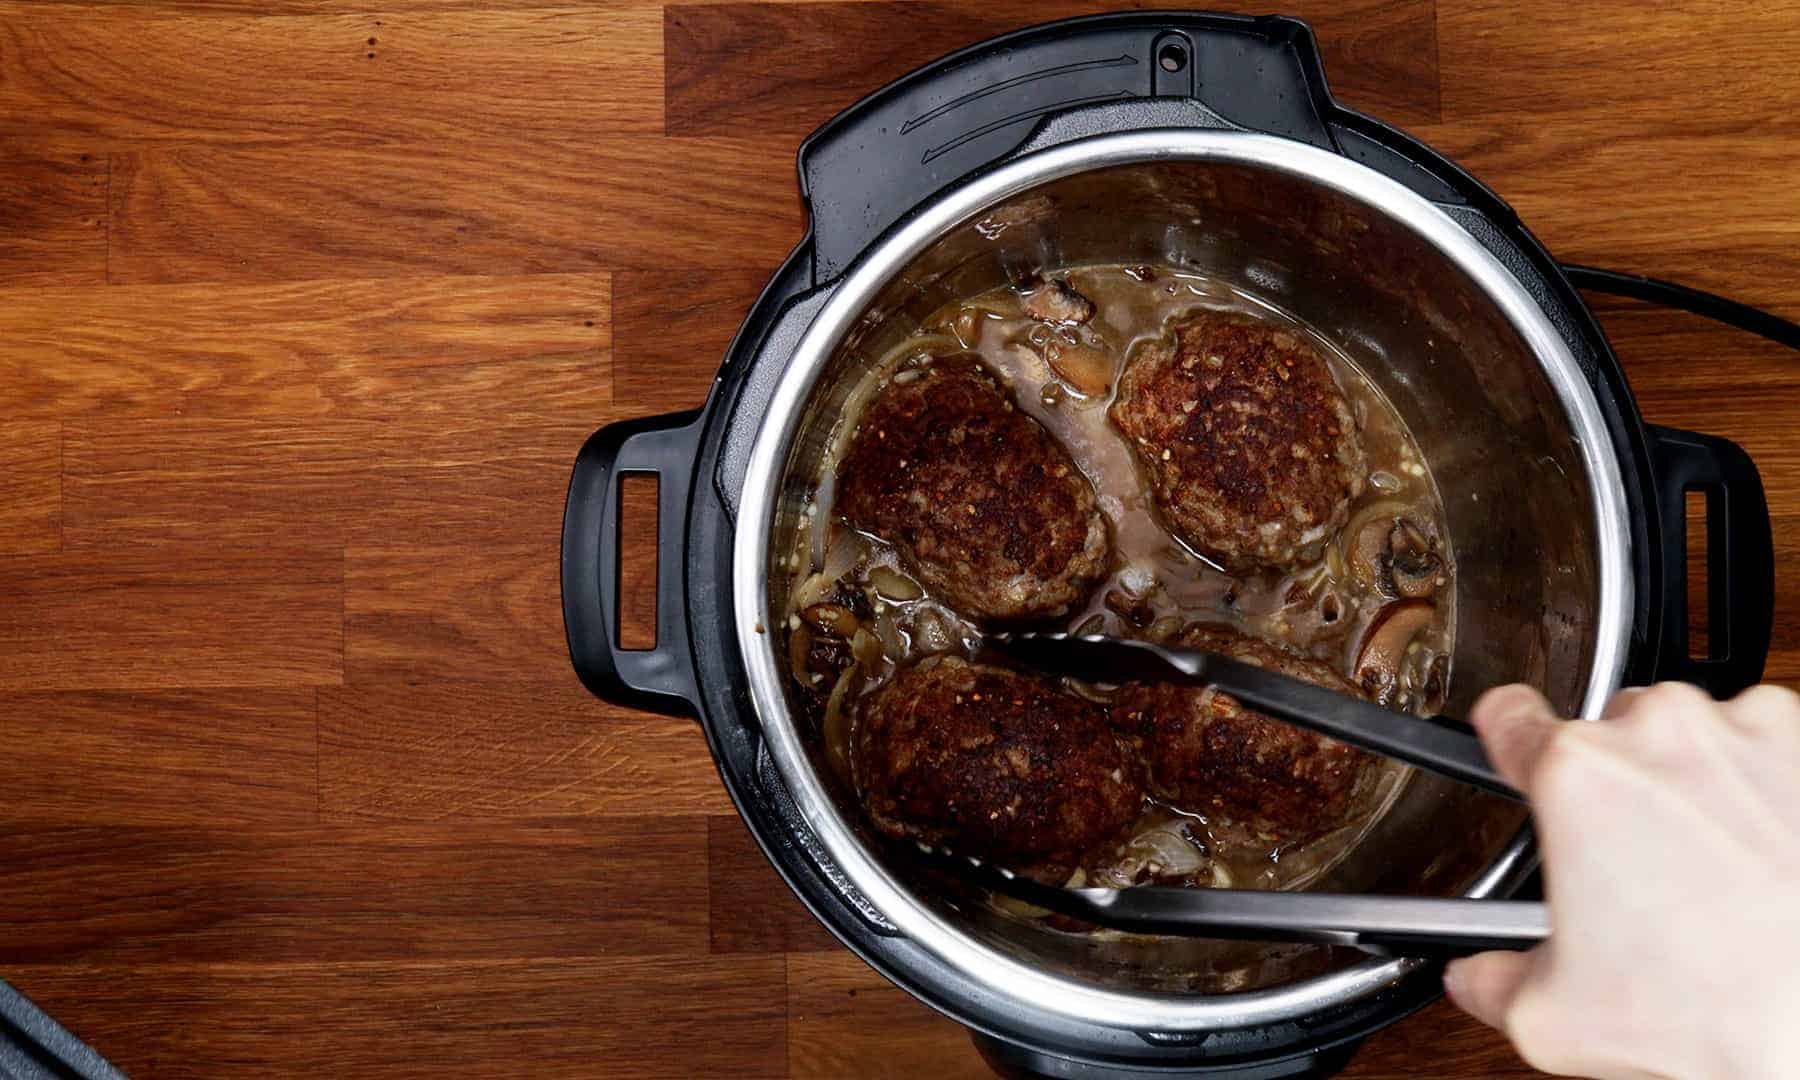 How to Cook Hamburger in an Electric Pressure Cooker